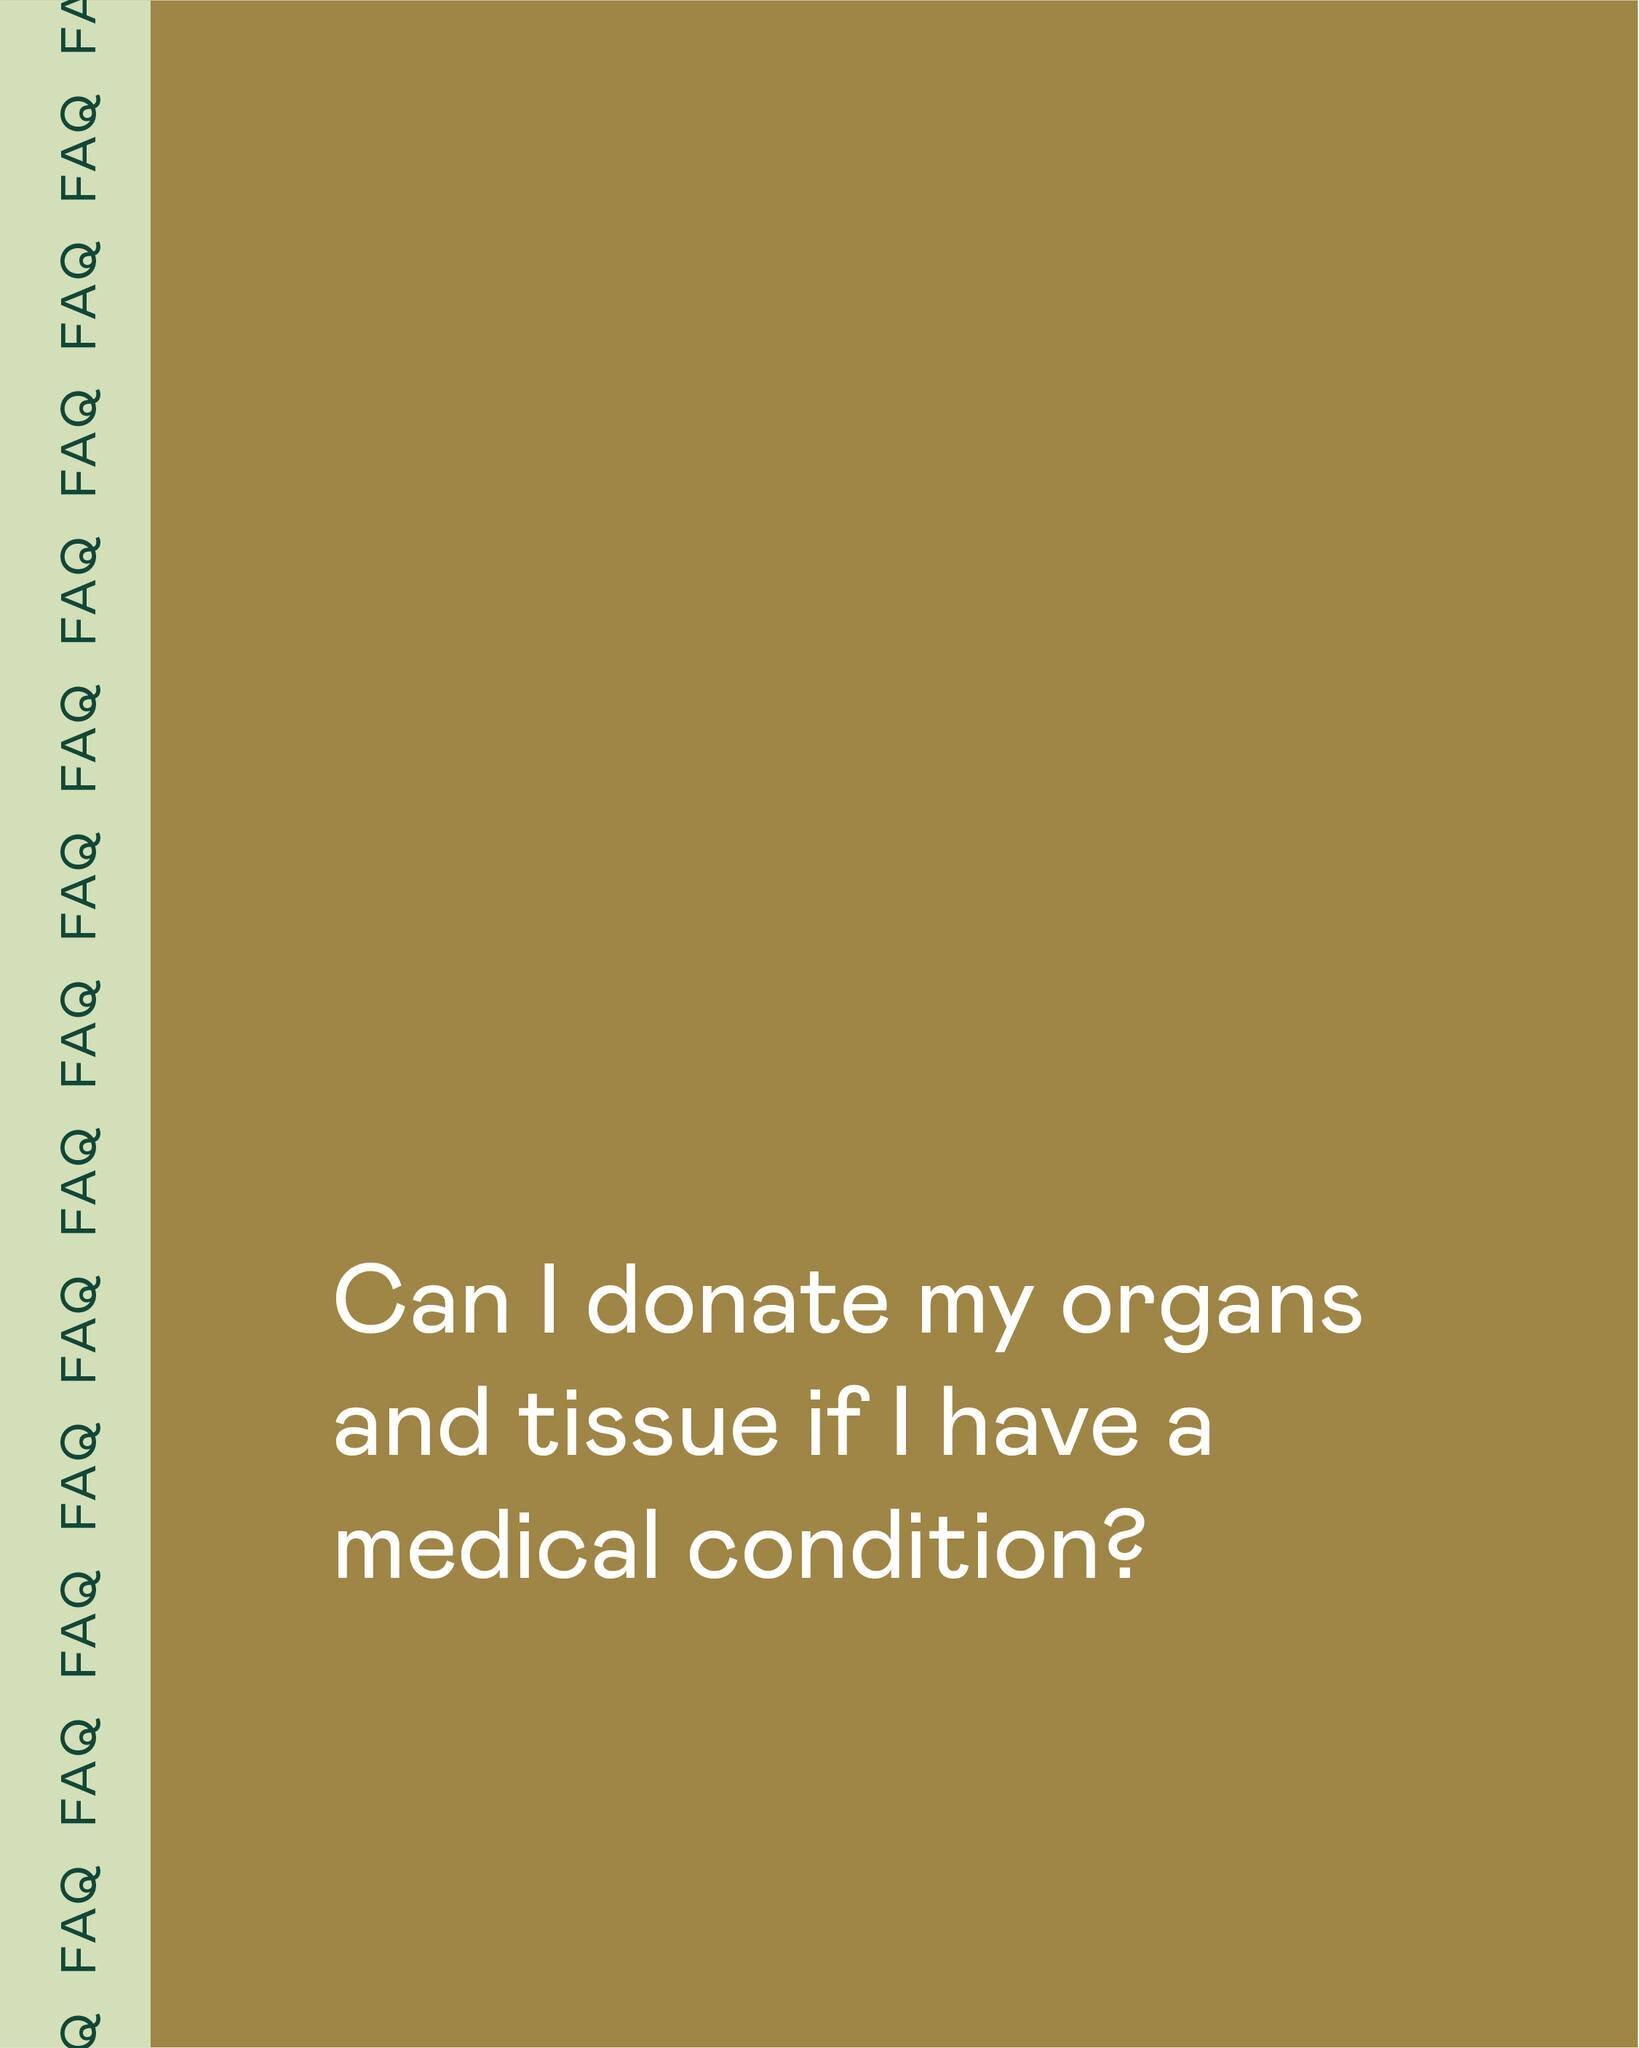 Q: Can I donate my organs and tissue if I have a medical condition?

A: Yes you can! A medical condition or serious illness does not exclude you as a potential organ donor. All potential donors are evaluated on an individual, medical, case-by-case ba